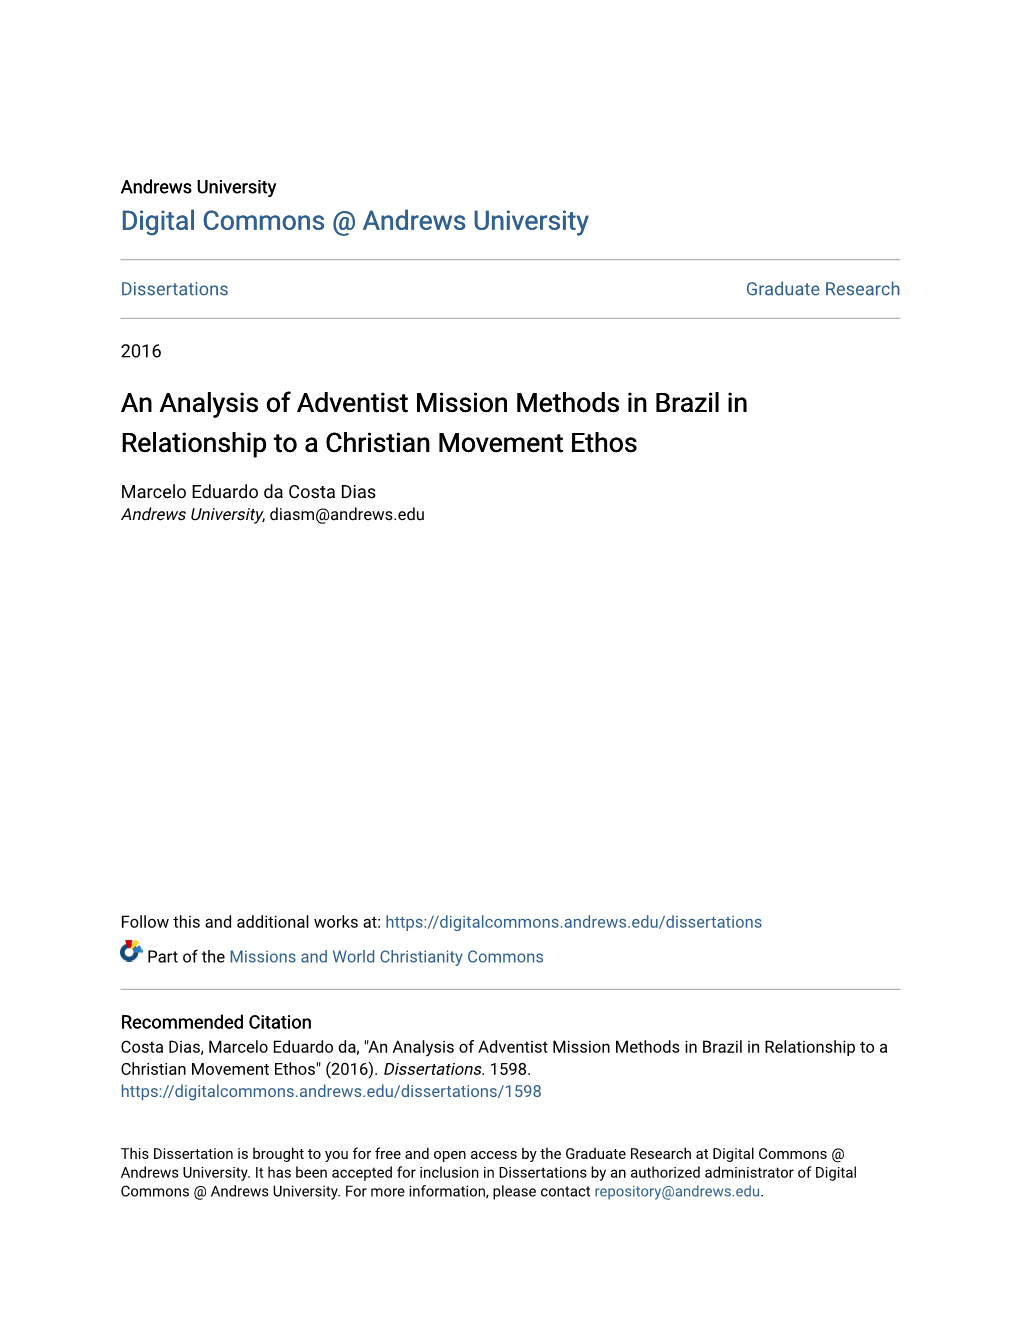 An Analysis of Adventist Mission Methods in Brazil in Relationship to a Christian Movement Ethos